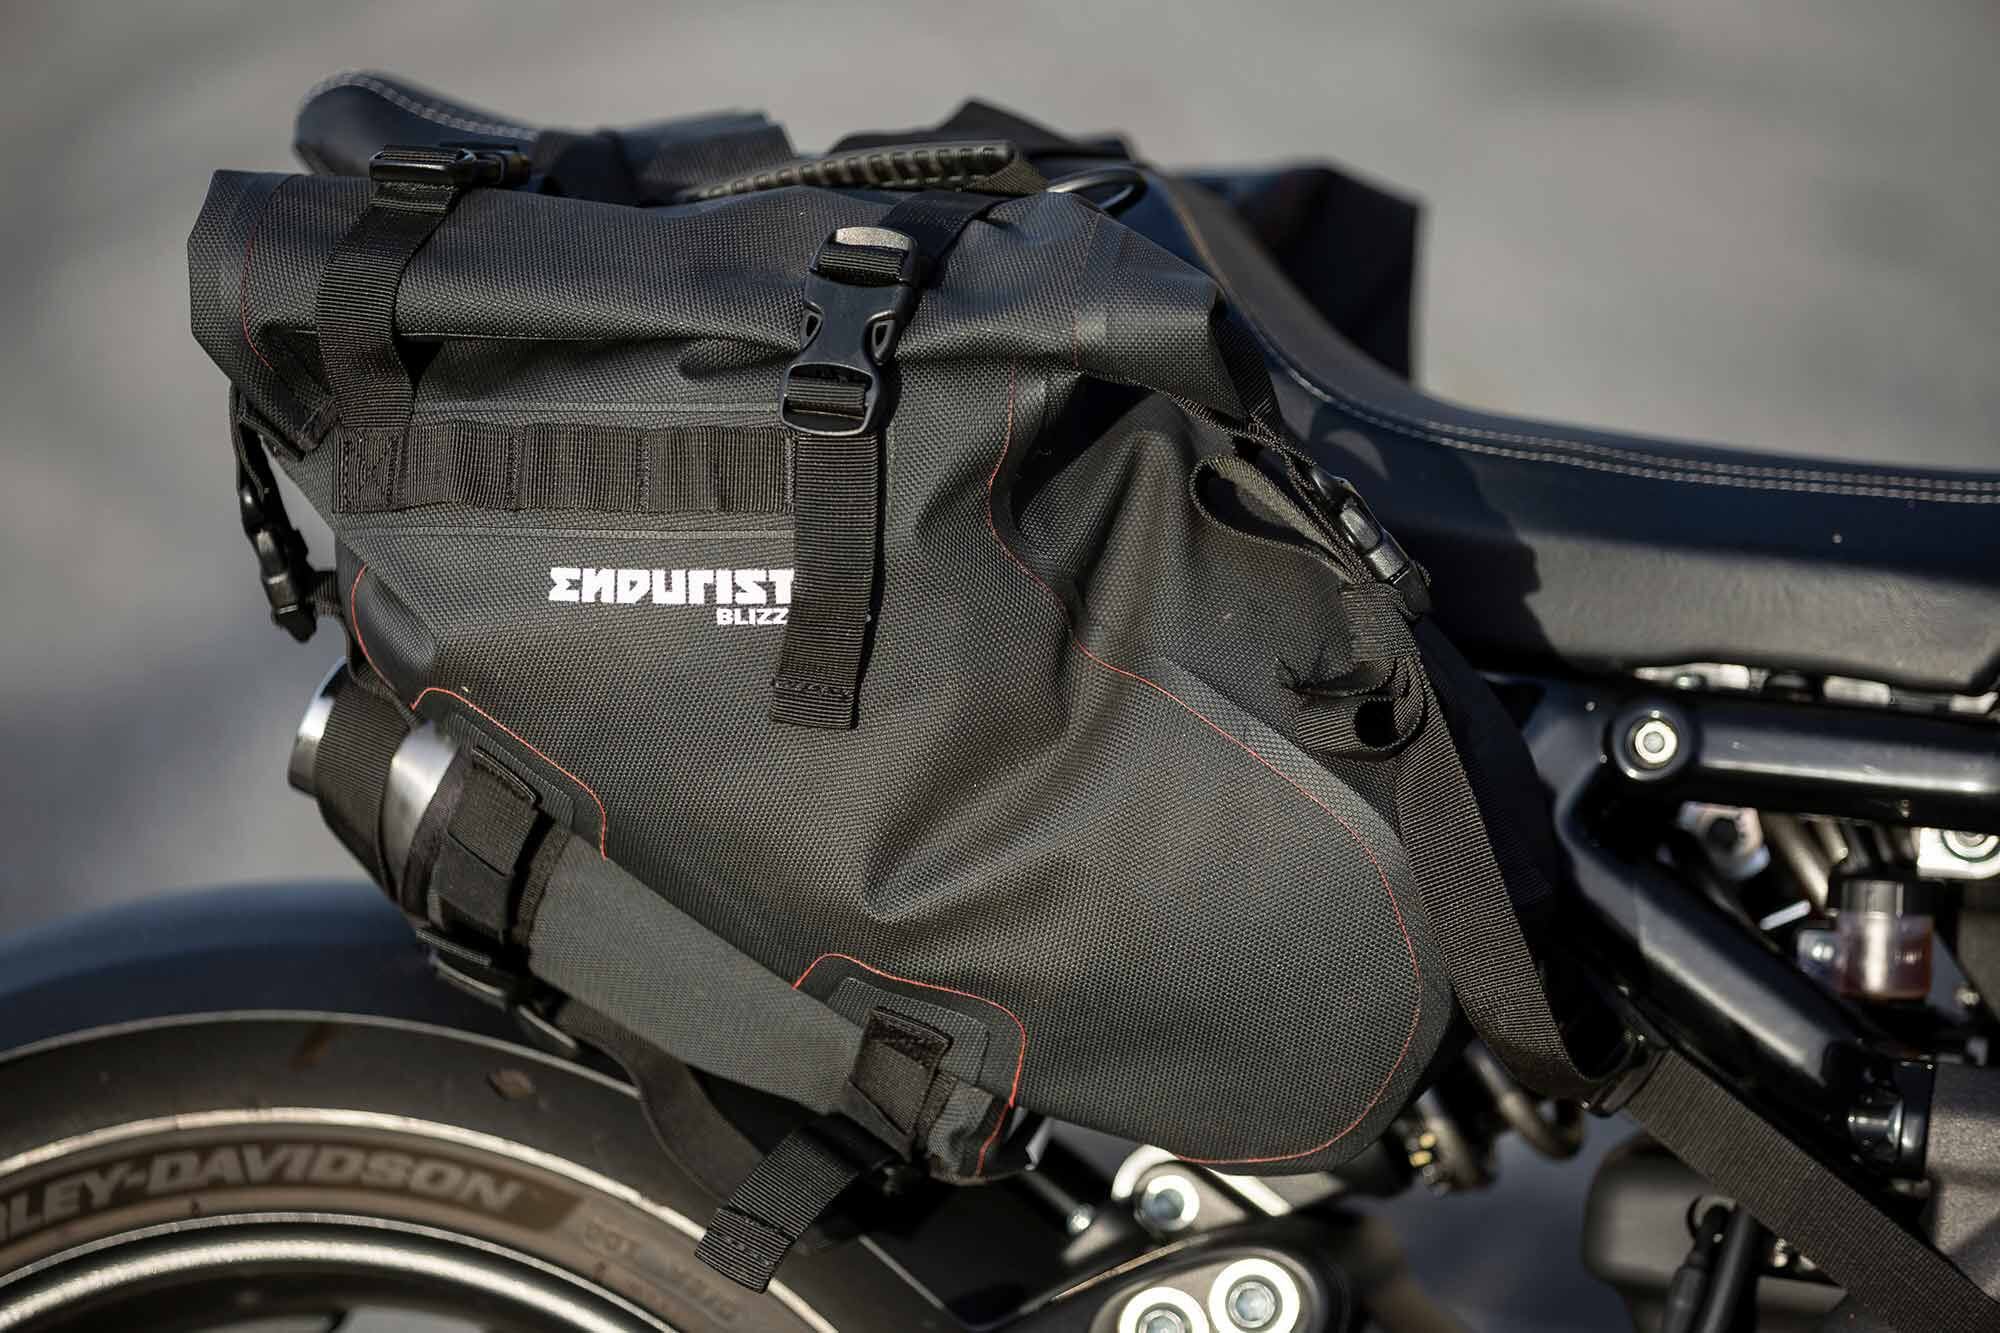 Blizzard saddlebags from Enduristan fit the LiveWire One like they were made for it and provided much-needed storage on our journey.